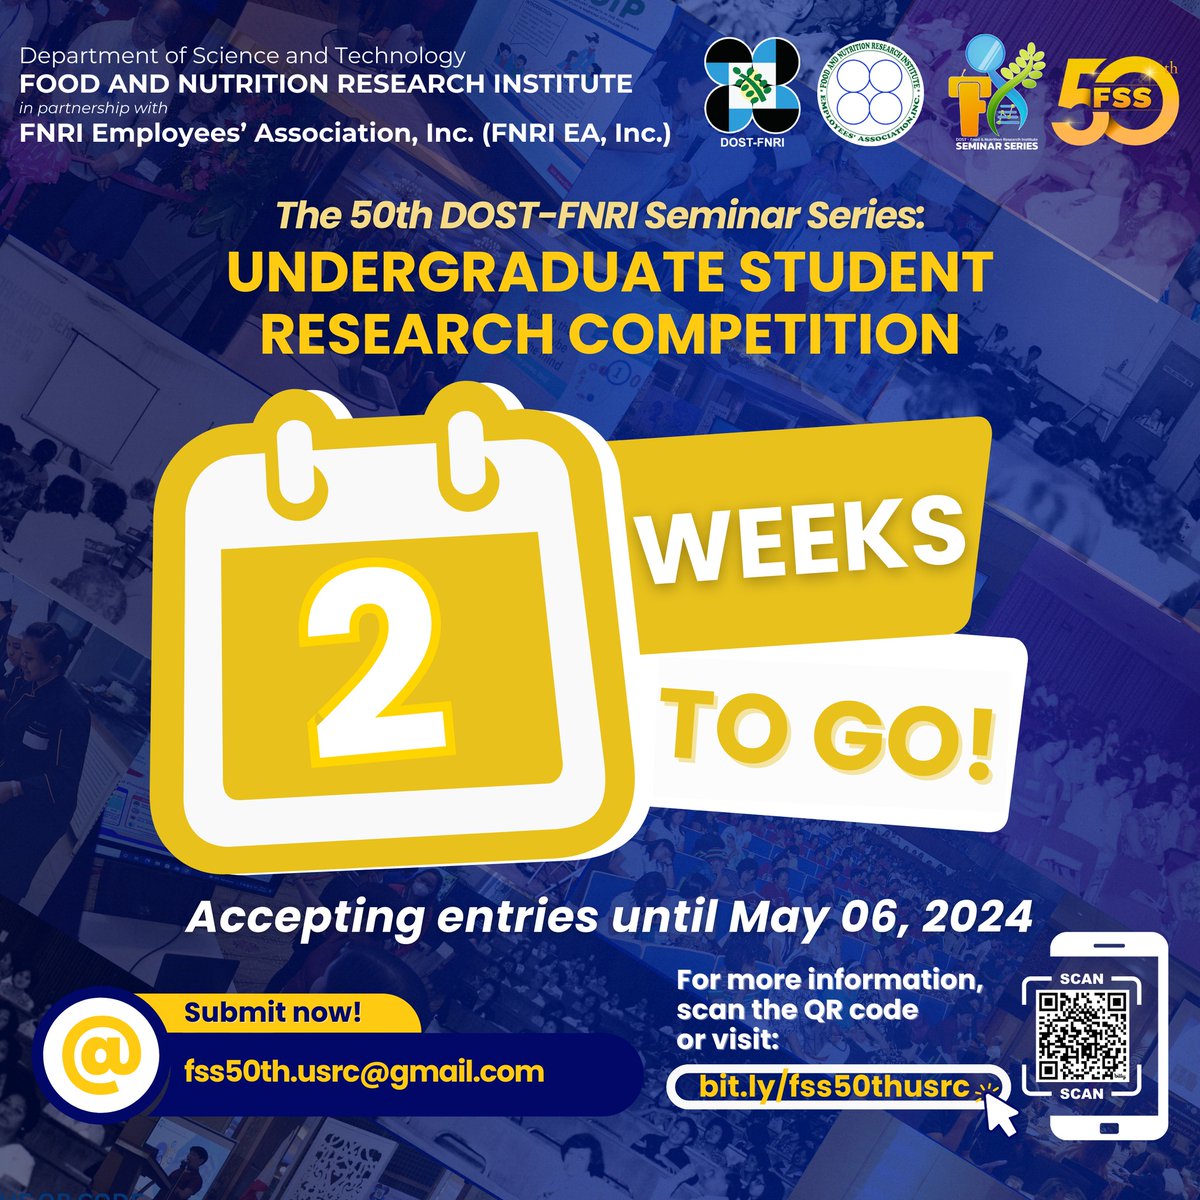 Just 2 weeks to go! Calling all aspiring researchers! 📷 Submit your entries on or before May 06, 2024, 5PM, and let your hard work shine! For more information, scan the QR code or visit: bit.ly/fss50thusrc